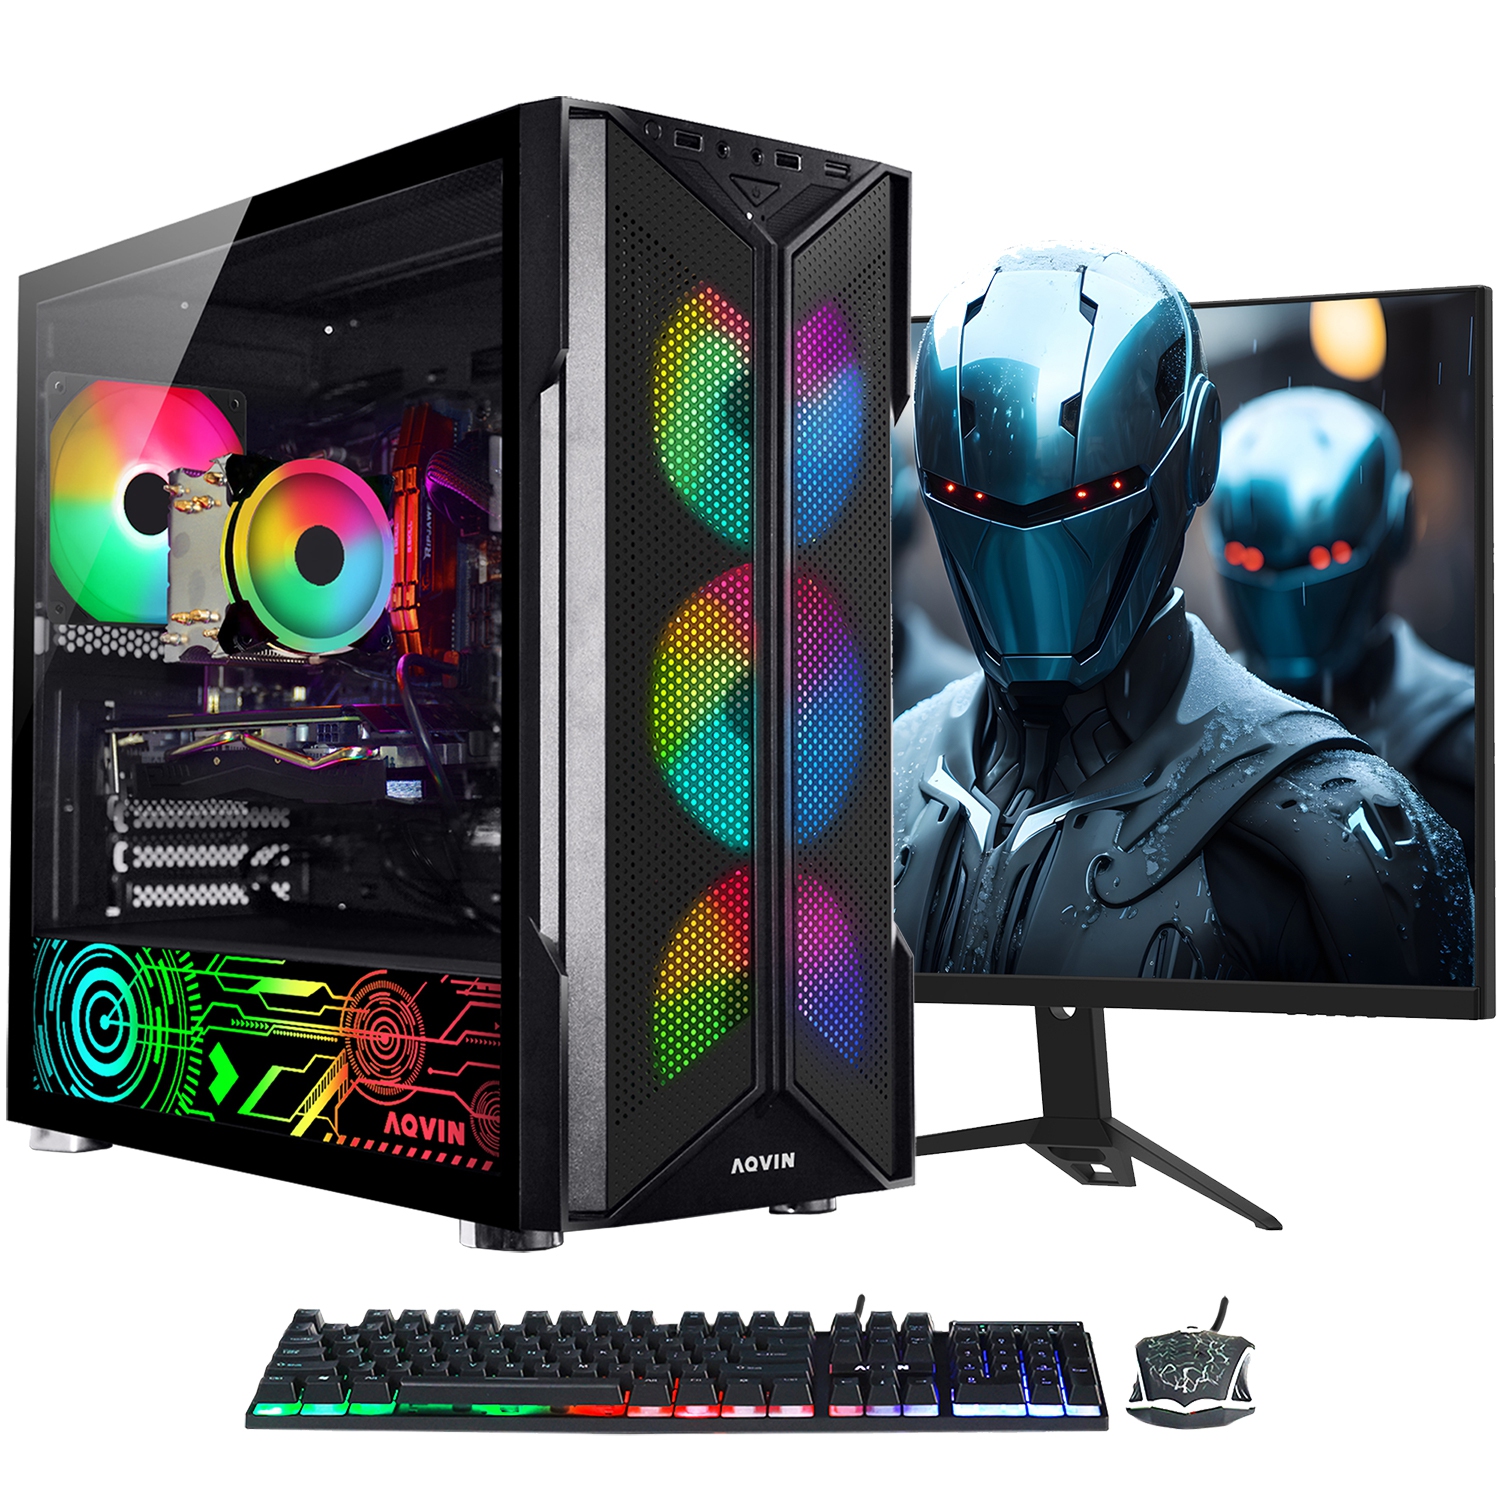 AQVIN-AQ20 Gaming PC Tower Desktop Computer Intel Core i7 up to 4.60 GHz 32GB DDR4 RAM 2TB SSD GeForce RTX 3050 8GB Windows 11 New 24 inch Curved Gaming Monitor